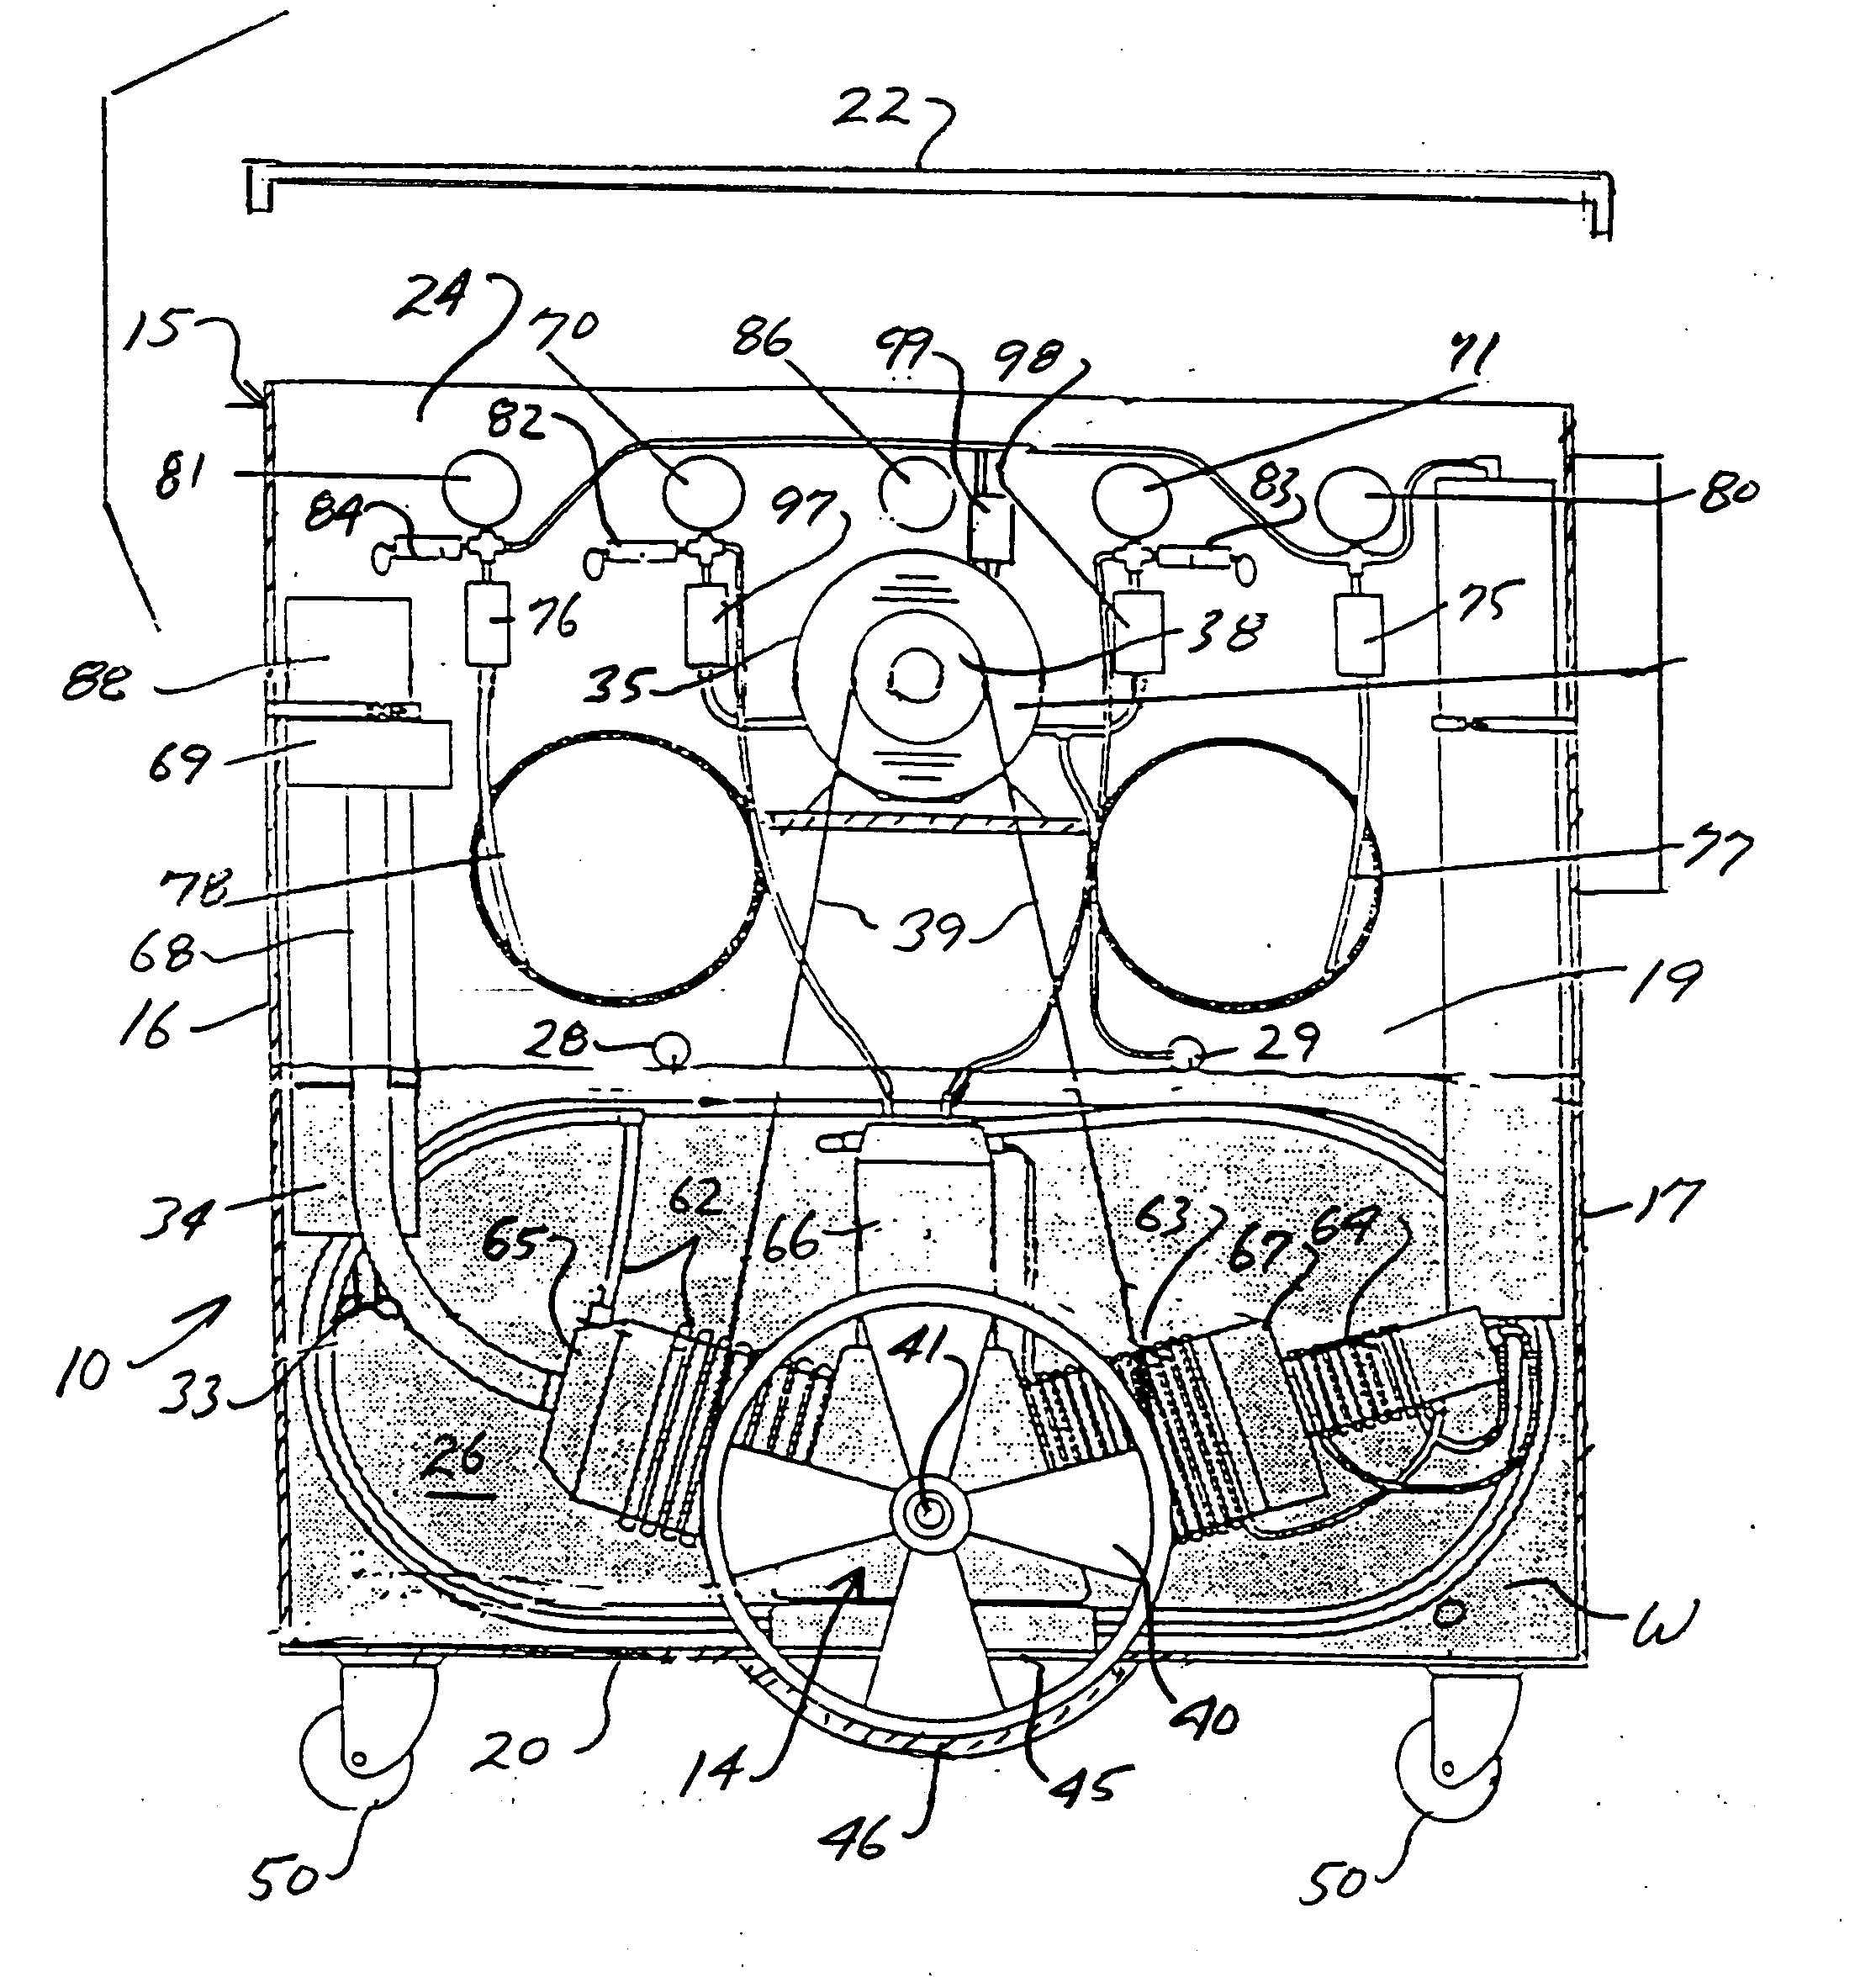 Compressor and gas cylinder containment and cooling apparatus